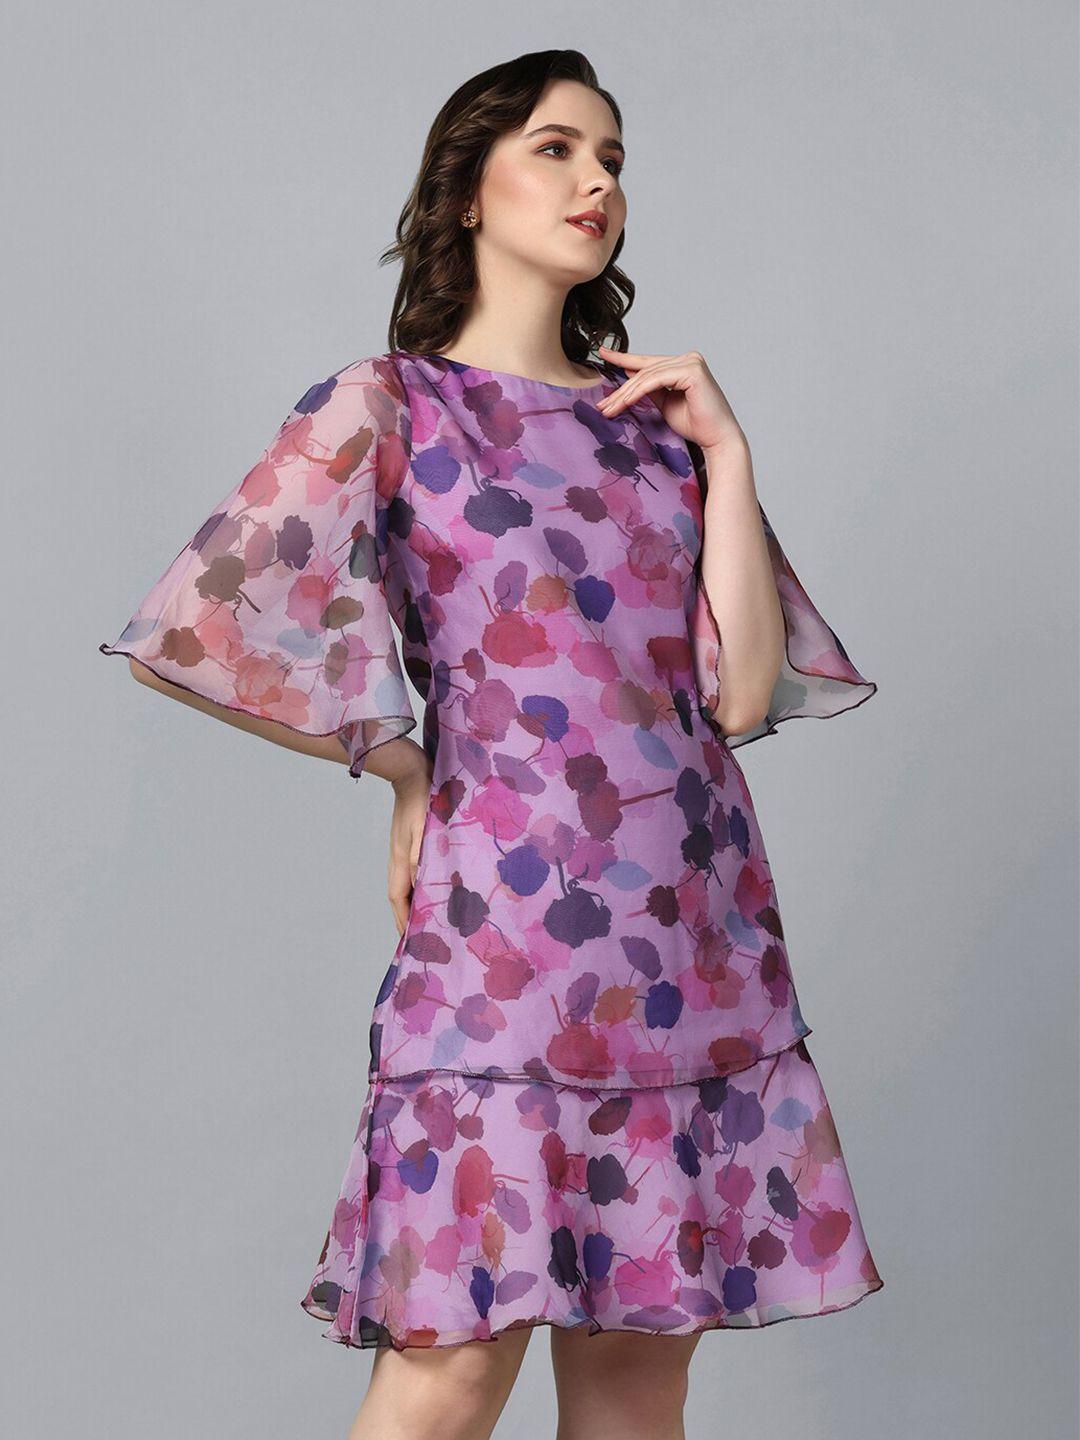 powersutra round neck floral printed flared sleeve a-line dress